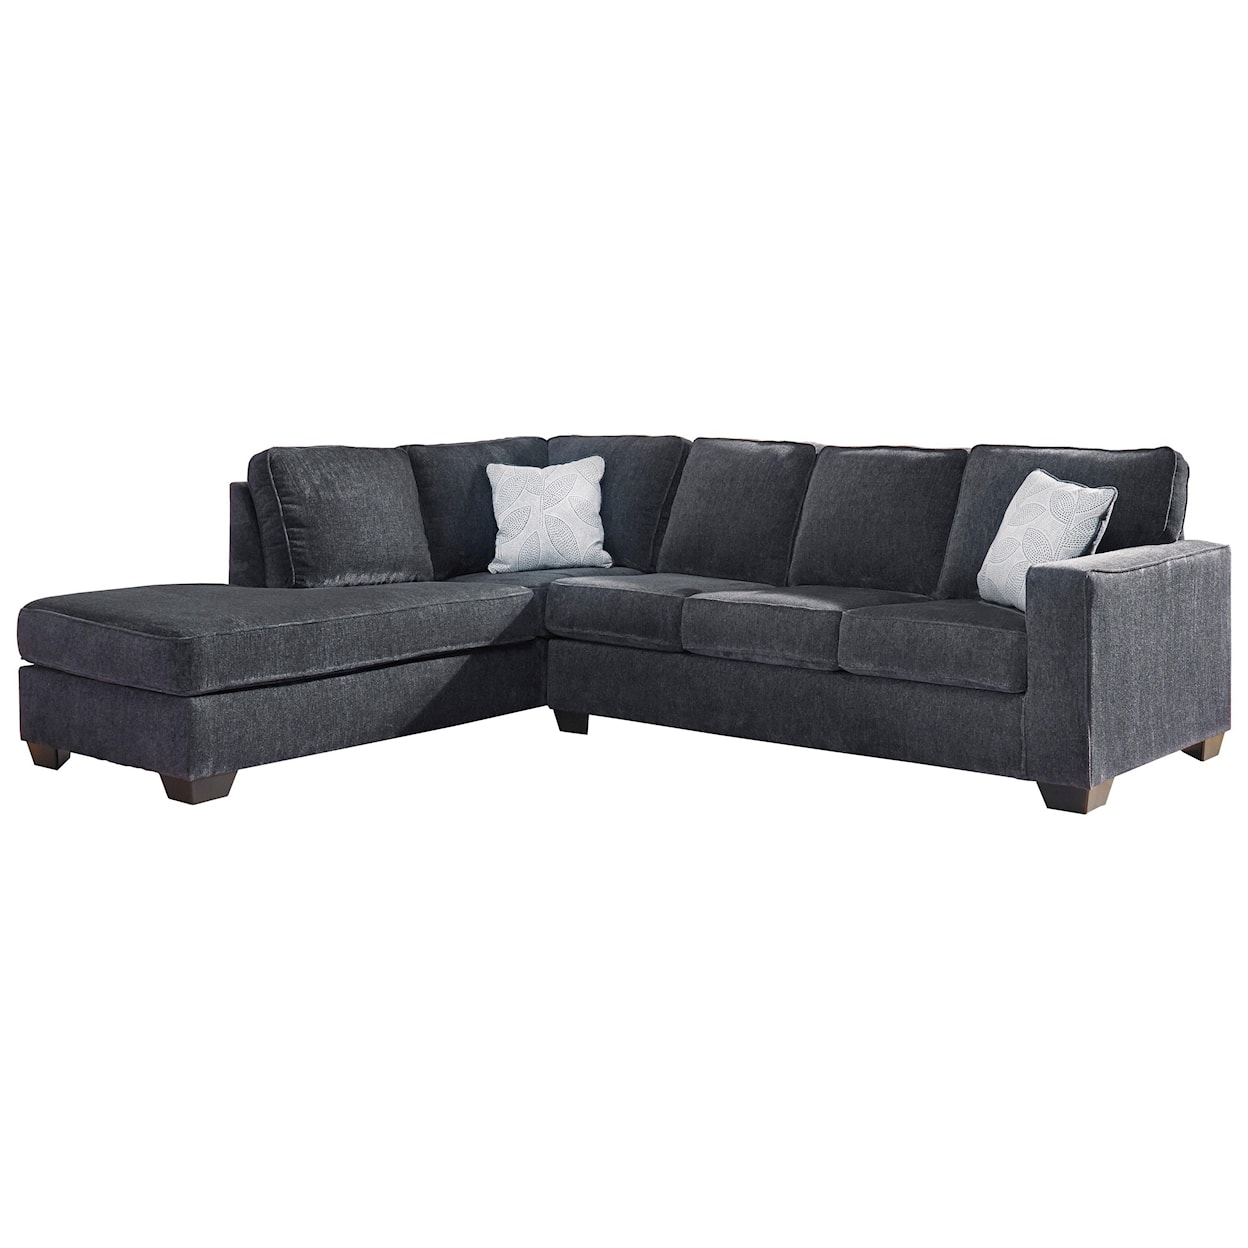 Signature Design by Ashley Altari 2 PC Sleeper Sectional and Ottoman Set